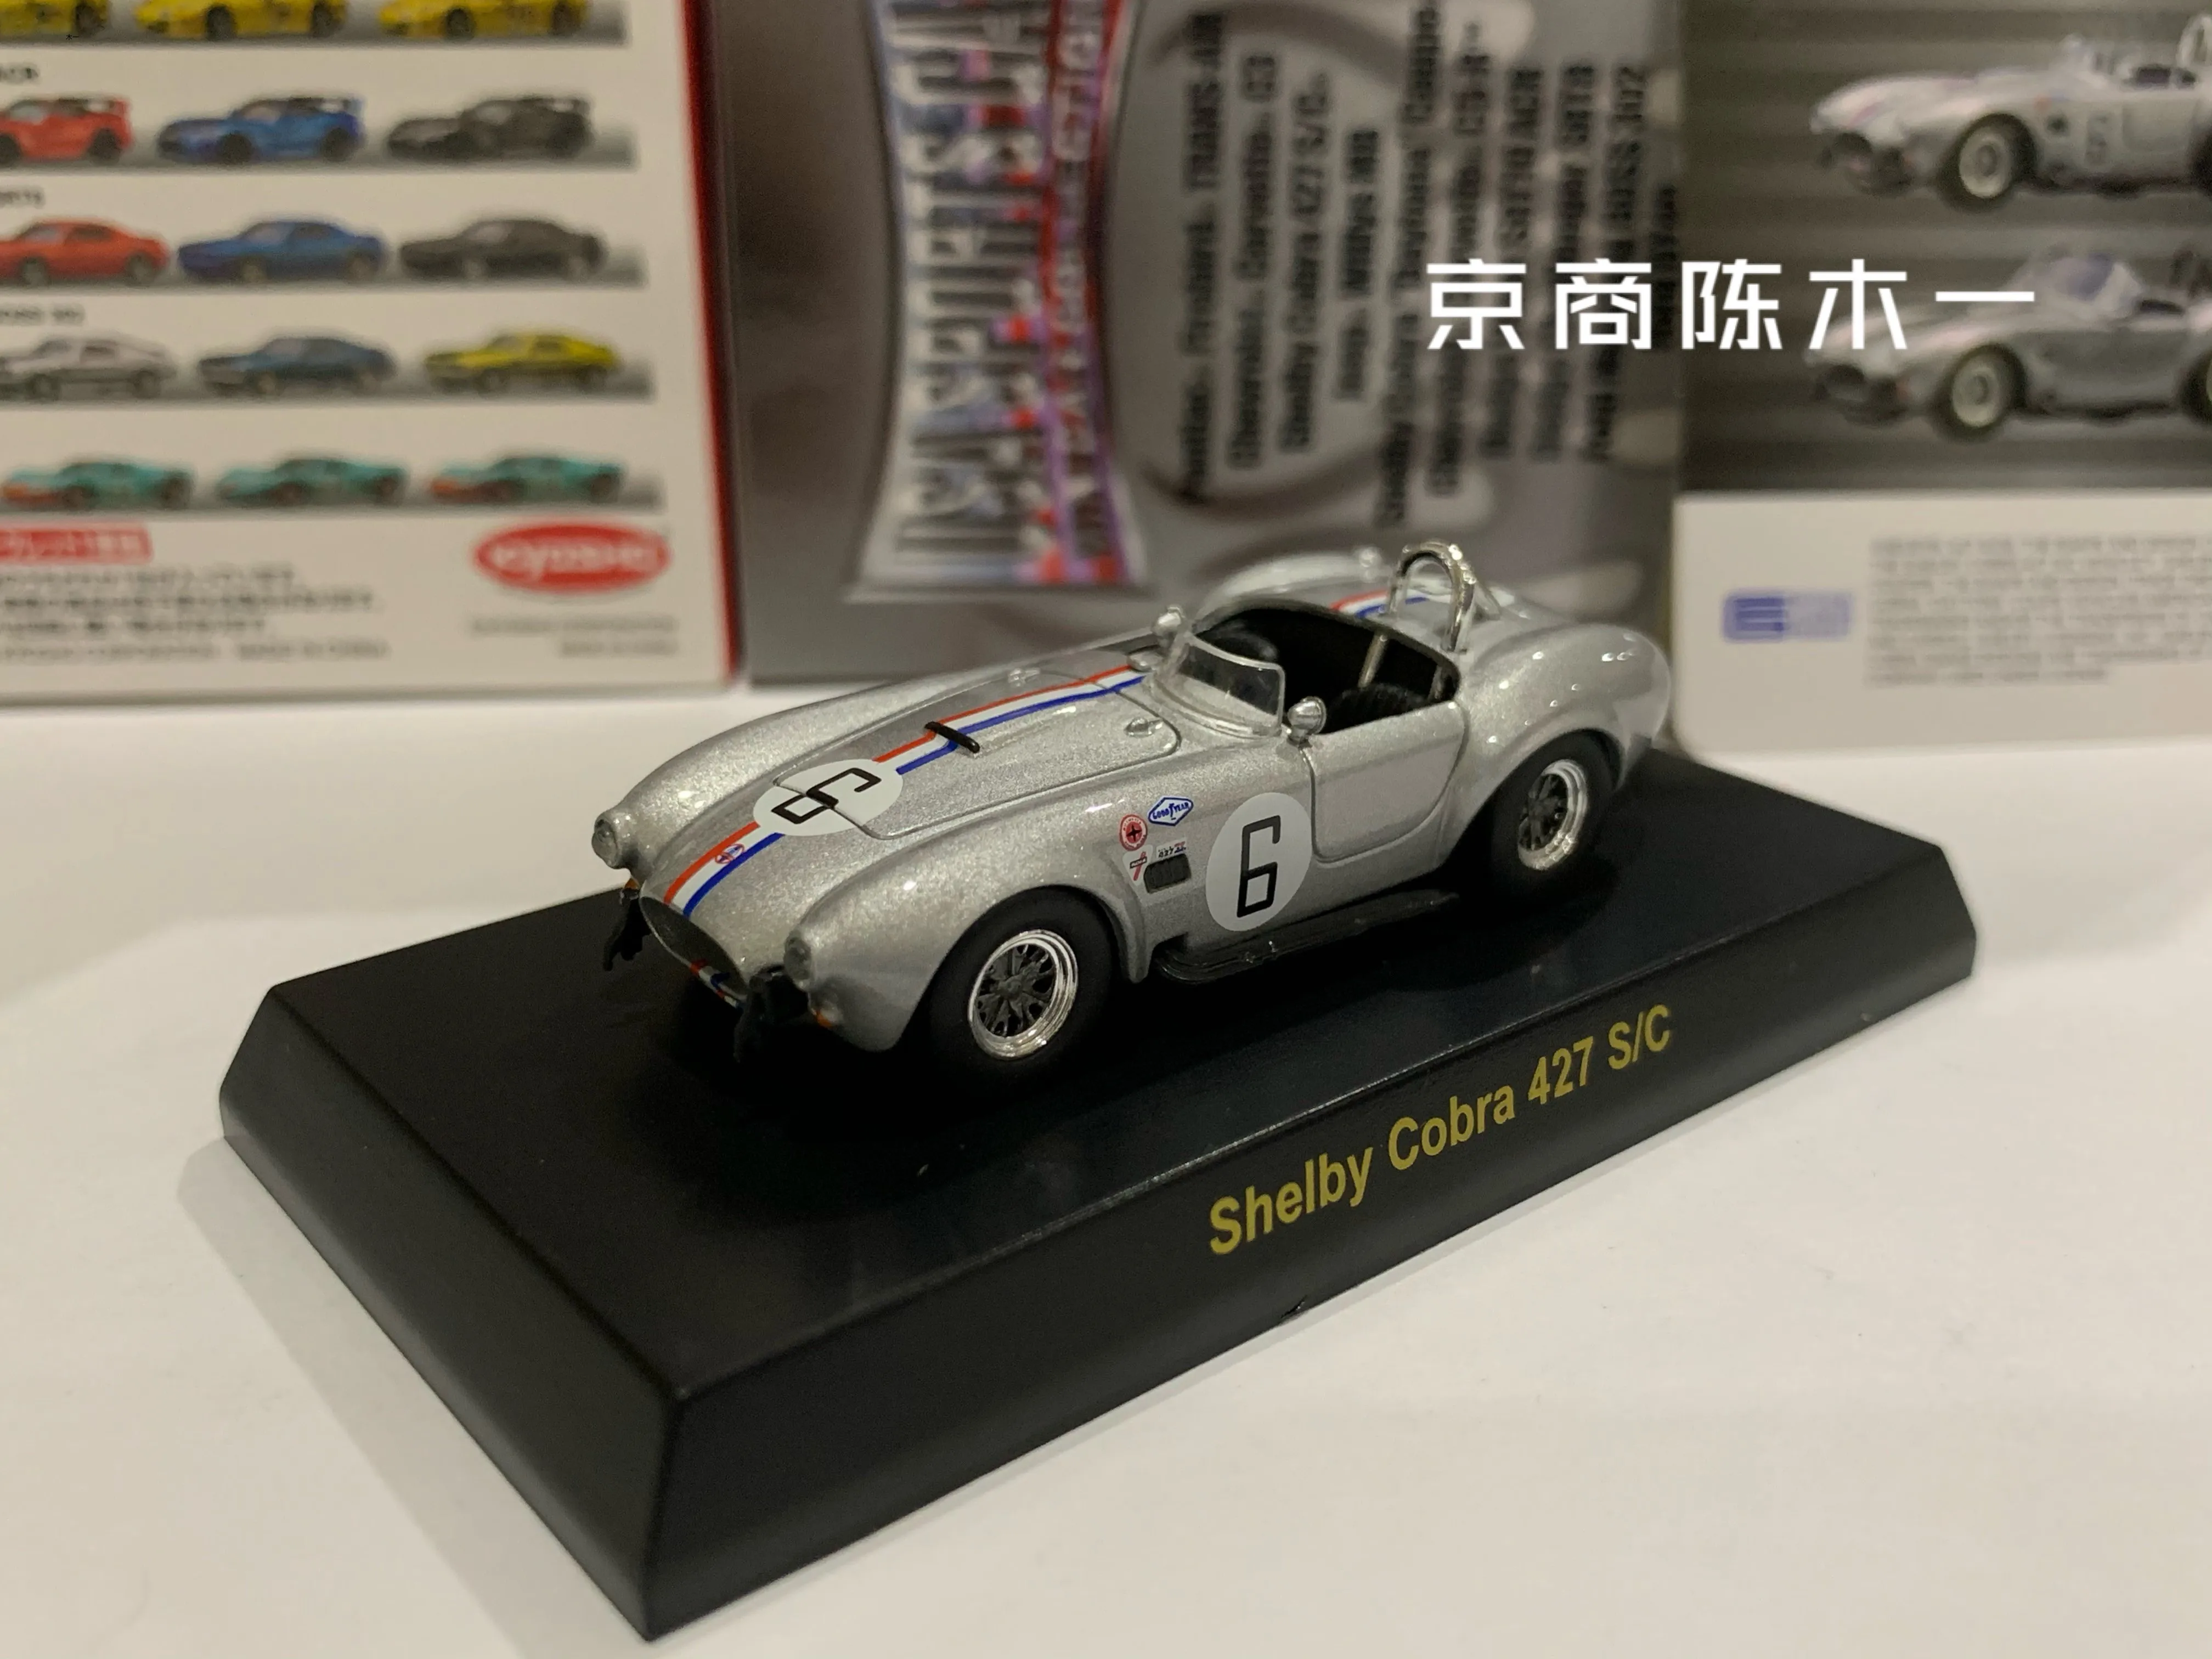 

1/64 KYOSHO Shelby Cobra 427 SC #6 Collection of die-cast alloy car decoration model toys